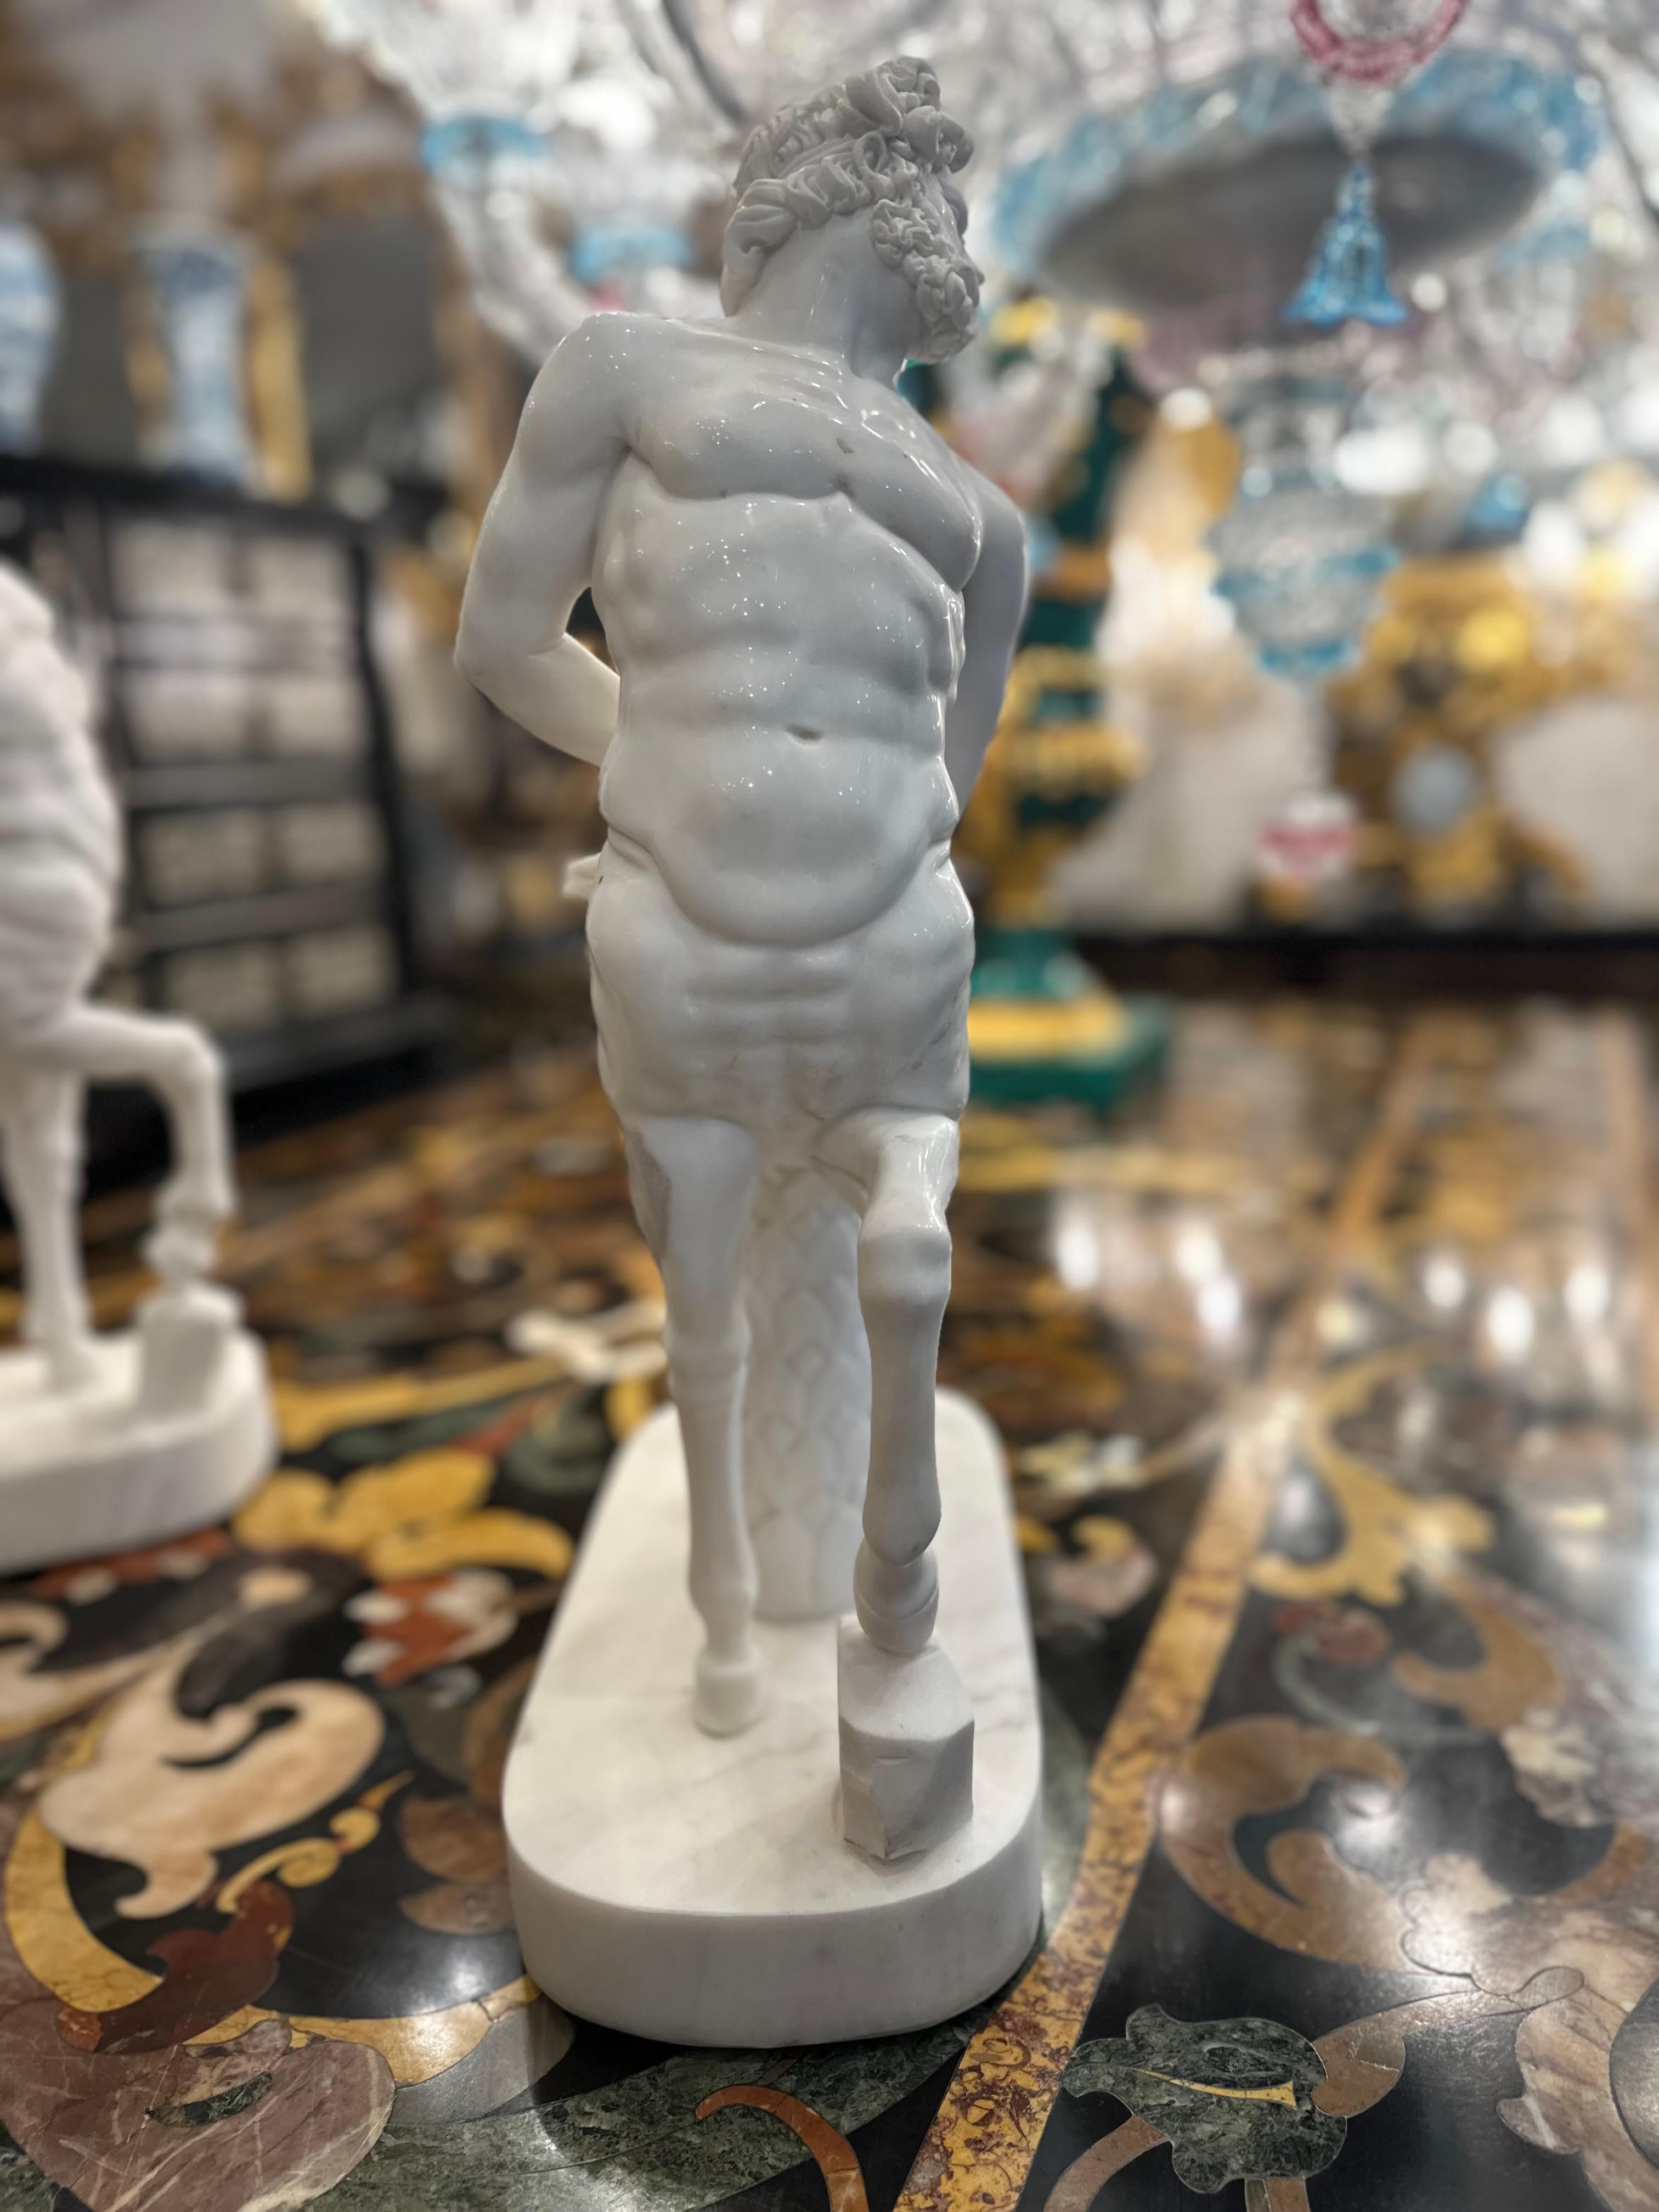 A wonderfully decorative pair of marble classical Greek style Centaurs. The polished marble is skilfully carved with intricate detailing to the the figures faces, muscles and pose. Rippled muscles are flexed, the hair is softly curled and their